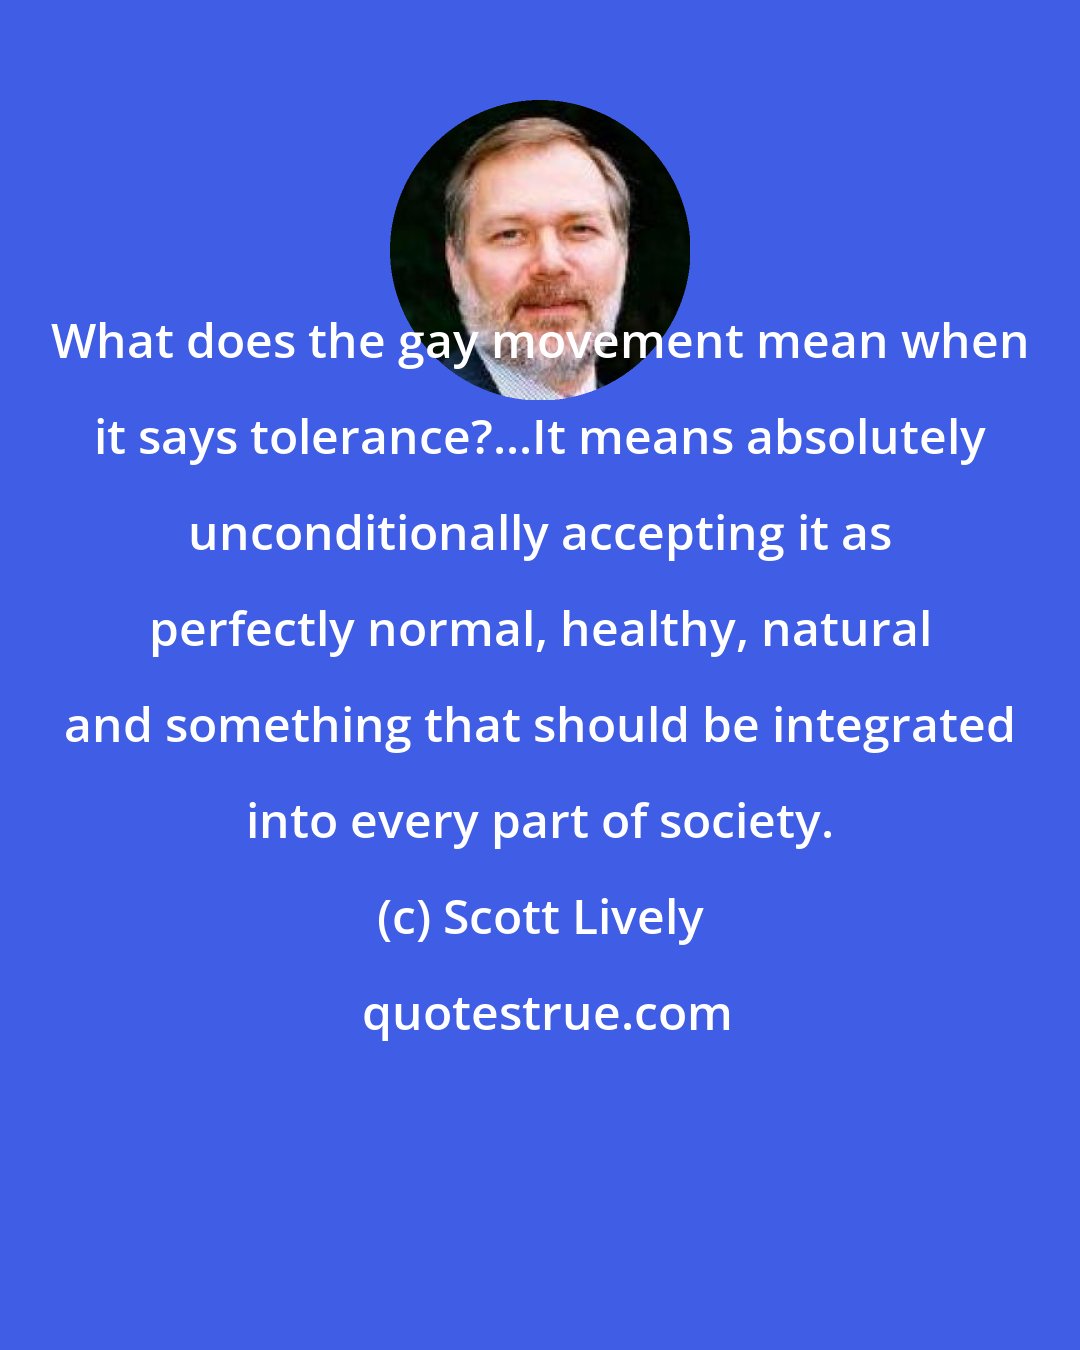 Scott Lively: What does the gay movement mean when it says tolerance?...It means absolutely unconditionally accepting it as perfectly normal, healthy, natural and something that should be integrated into every part of society.